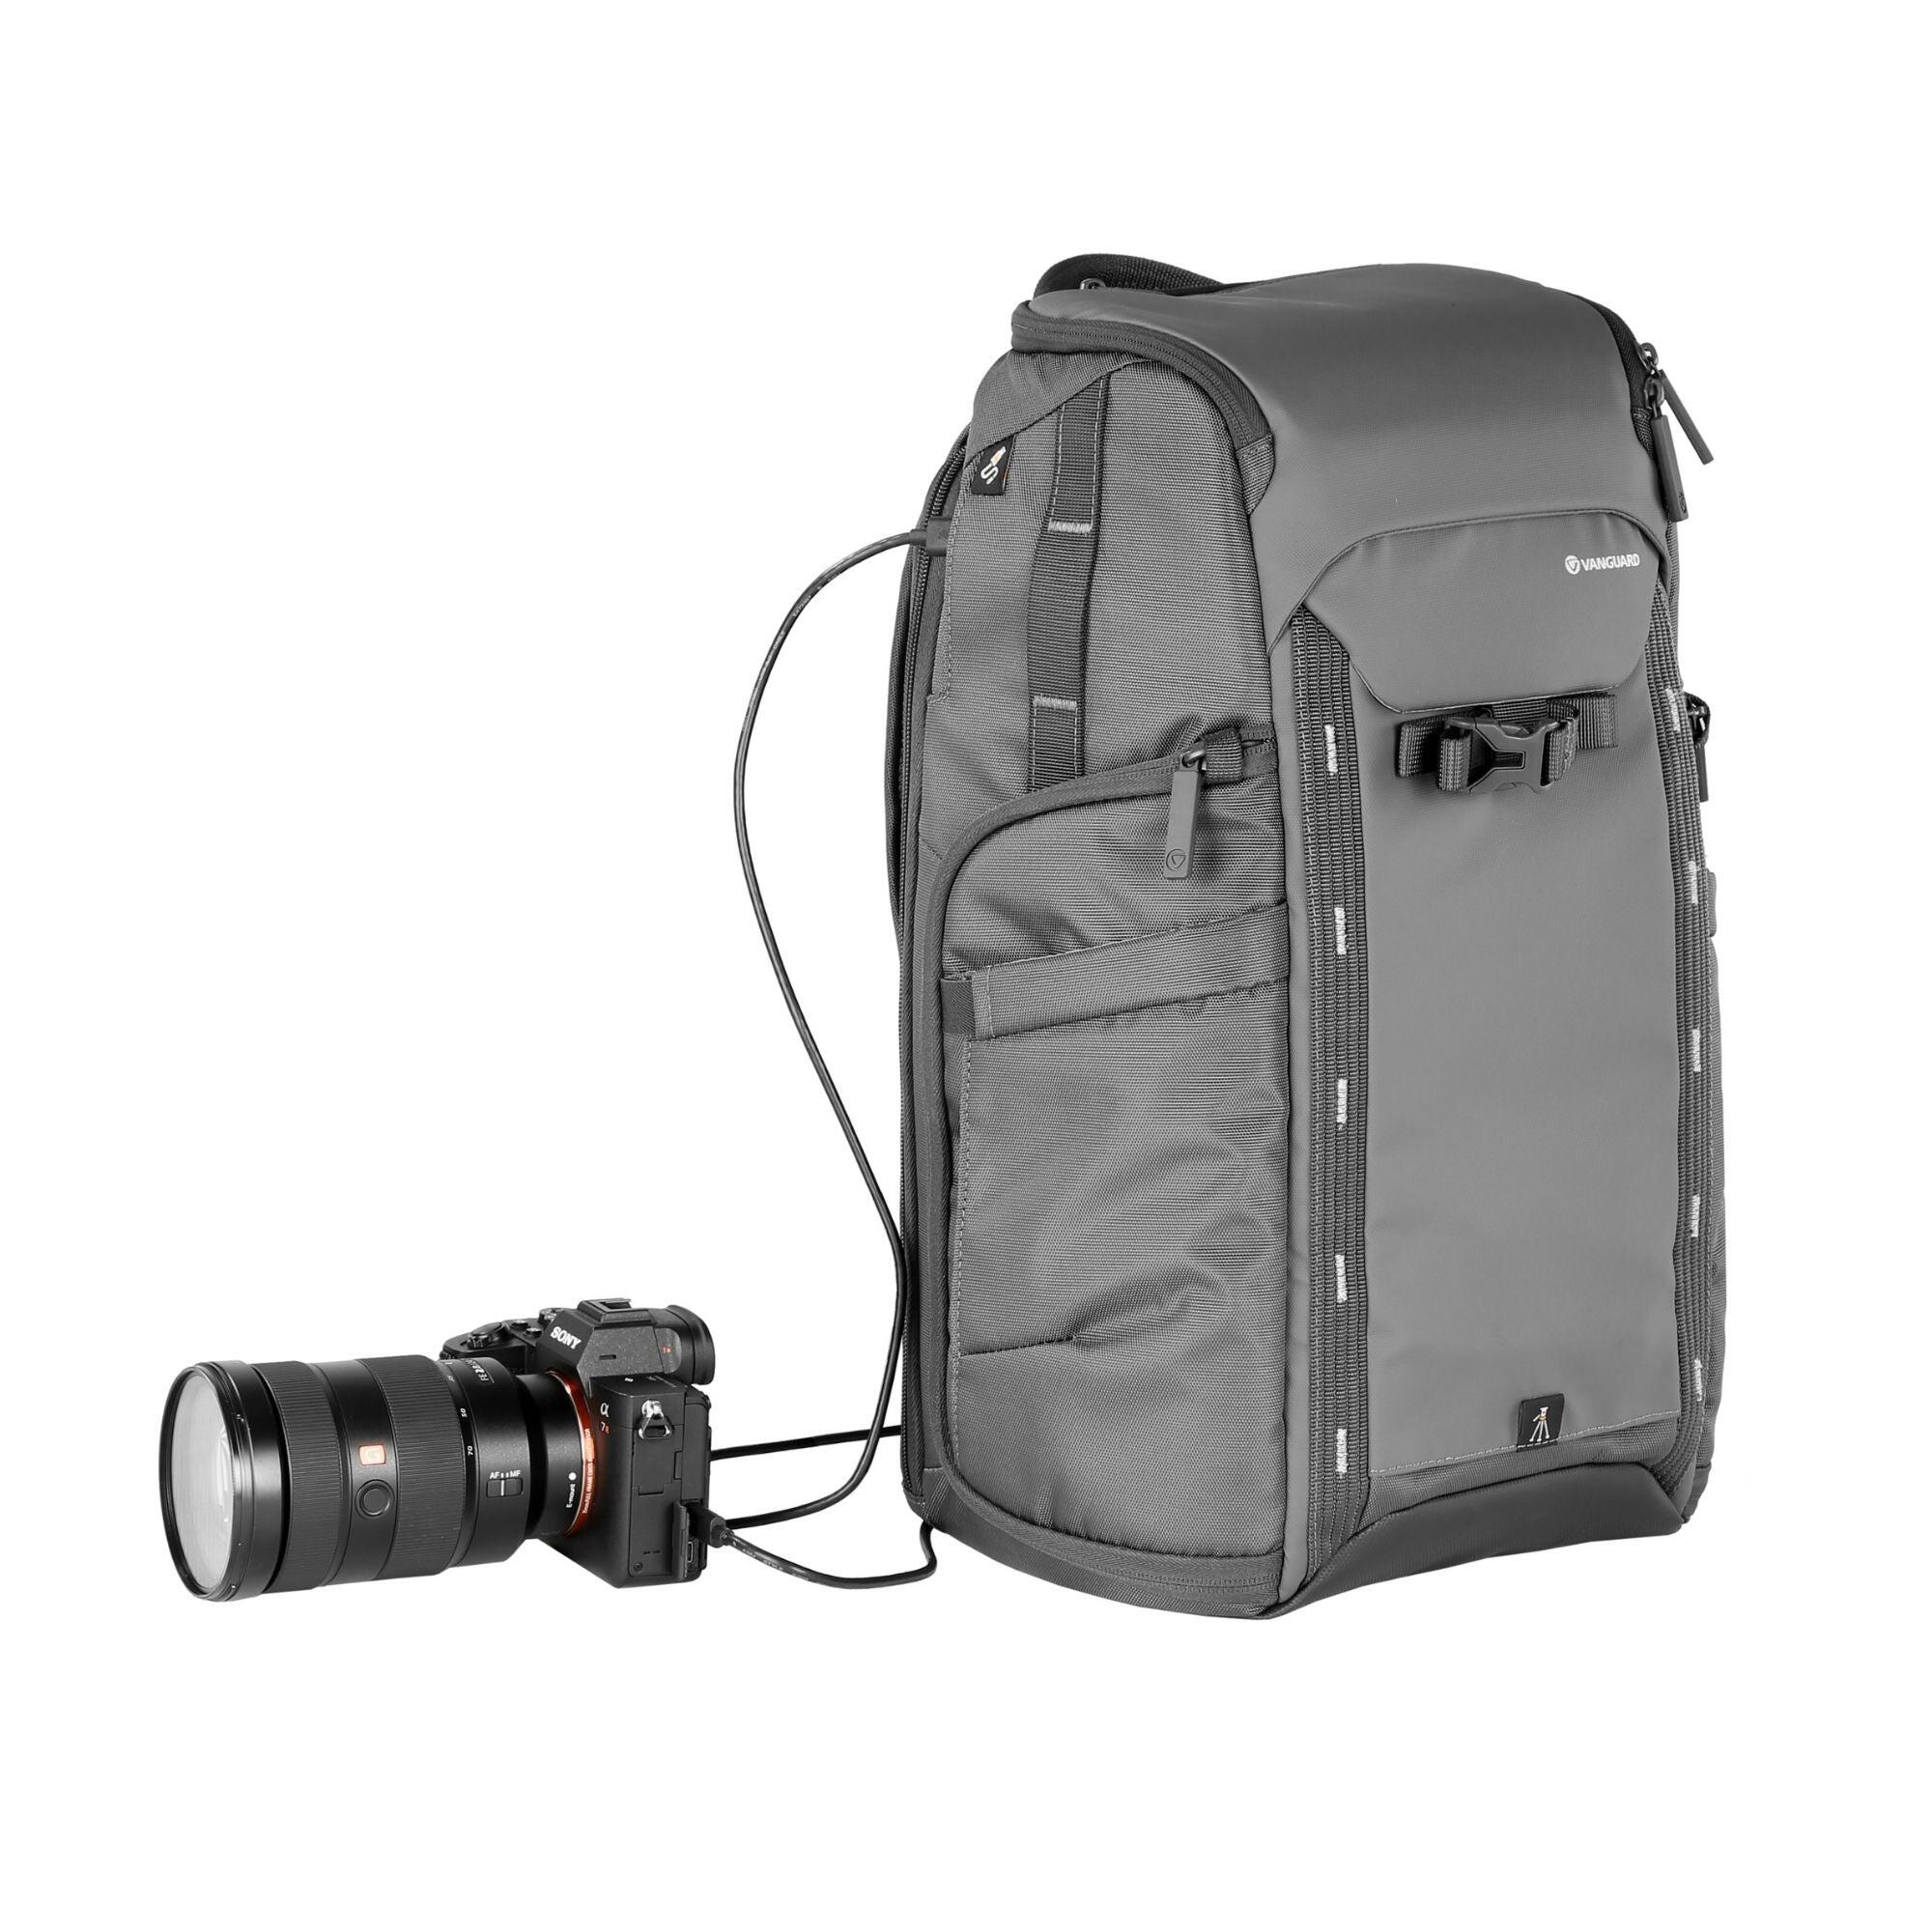 VEO ADAPTOR R44 GY Camera Backpack with USB Port - Grey 1/5